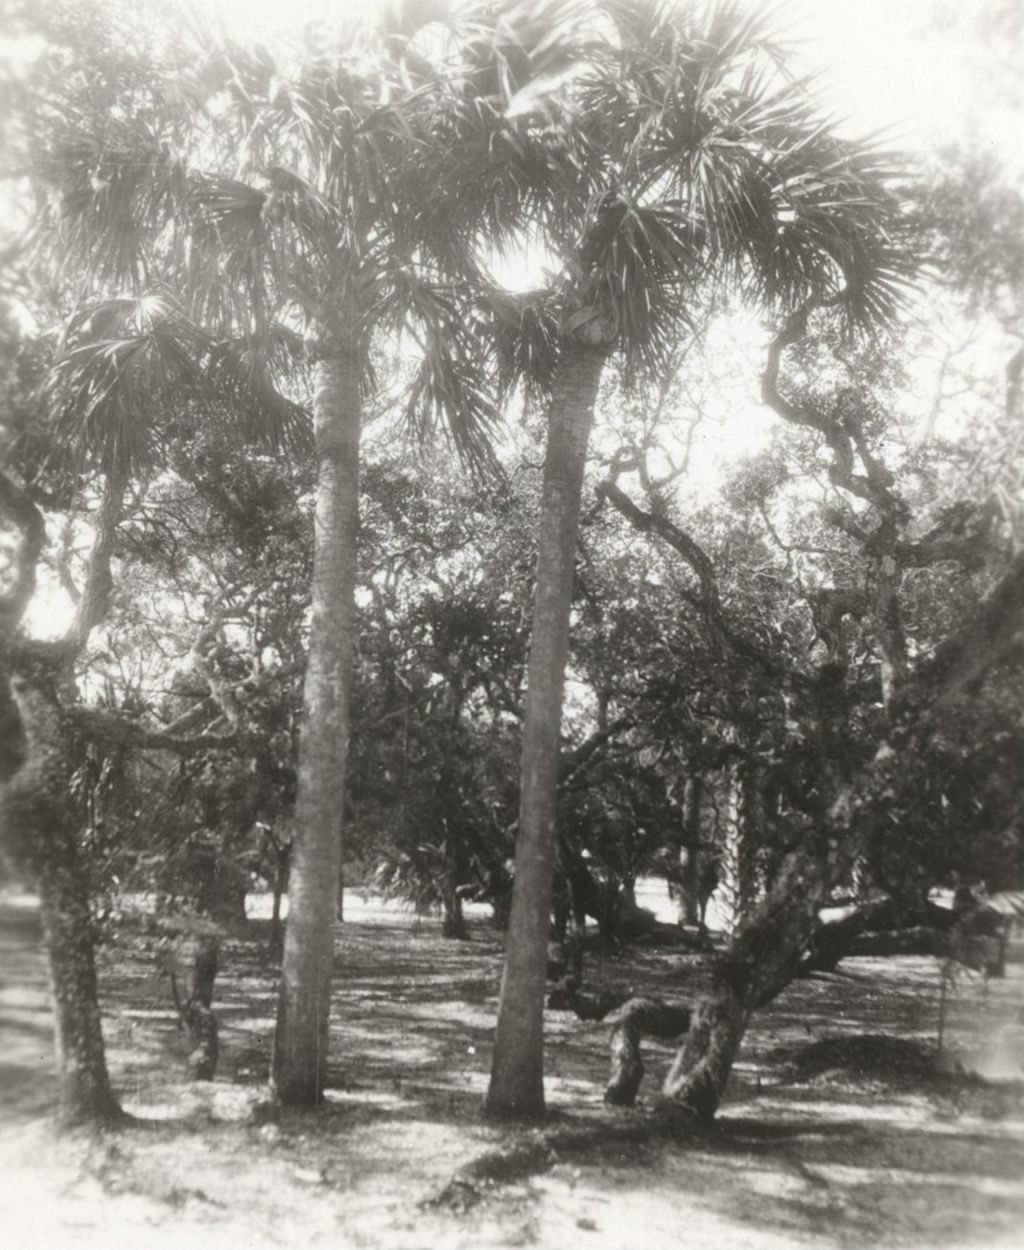 Miniature of Palm trees photographed on Jane Addams' trip to Mexico